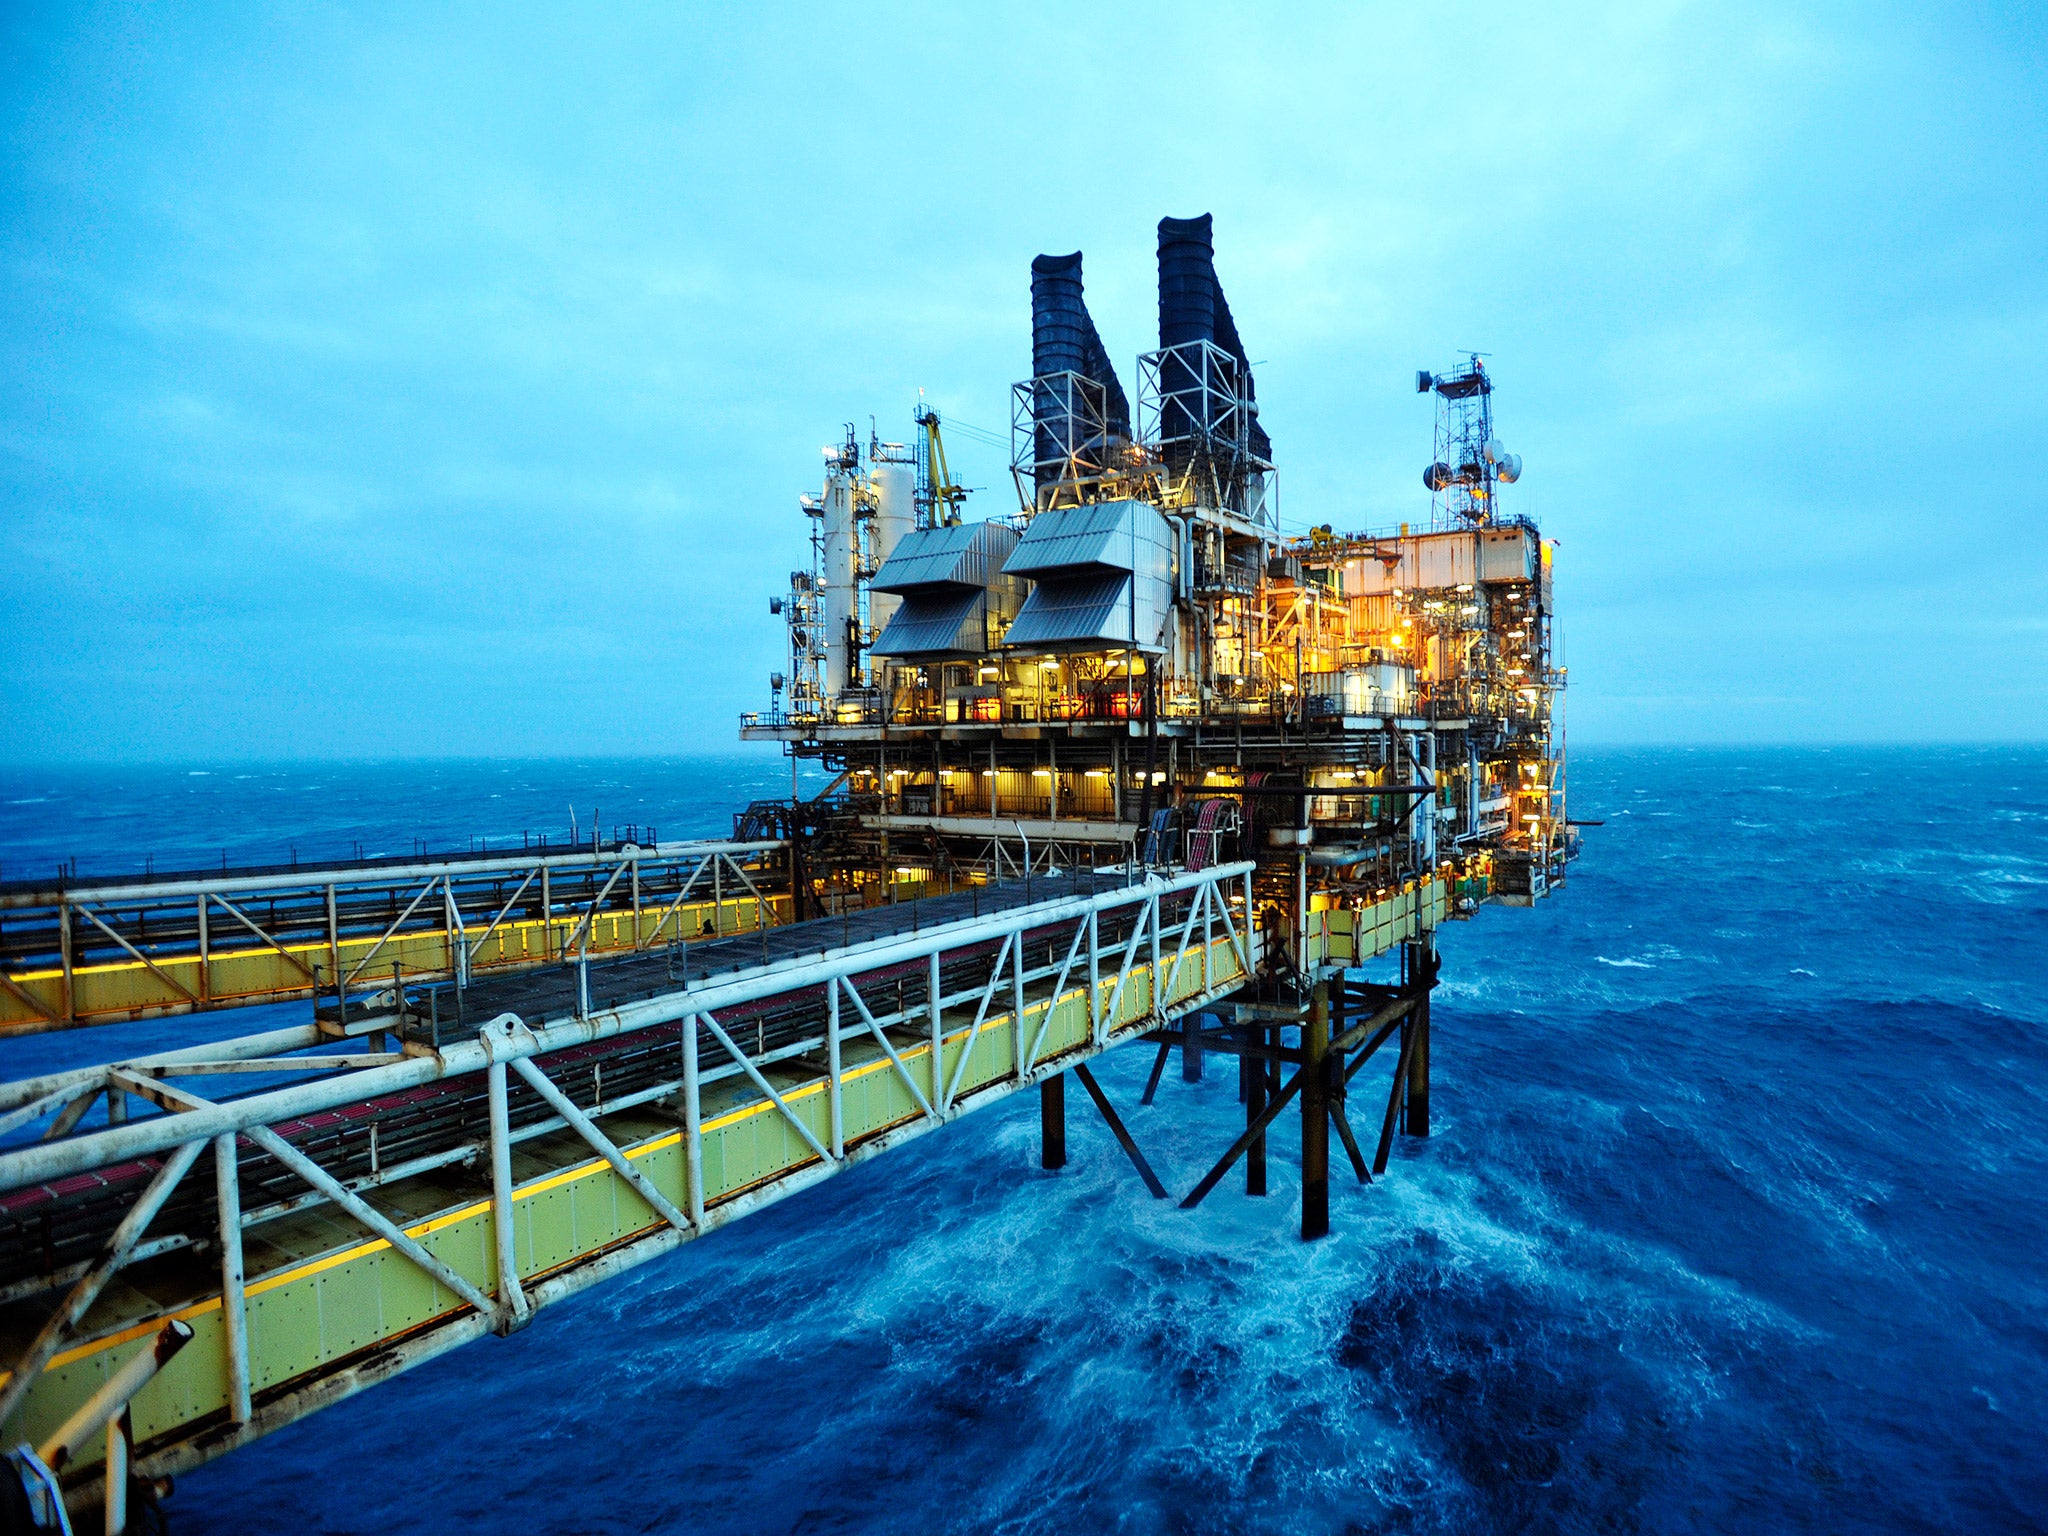 The BP ETAP (Eastern Trough Area Project) oil platform in the North Sea, around 100 miles east of Aberdeen, Scotland